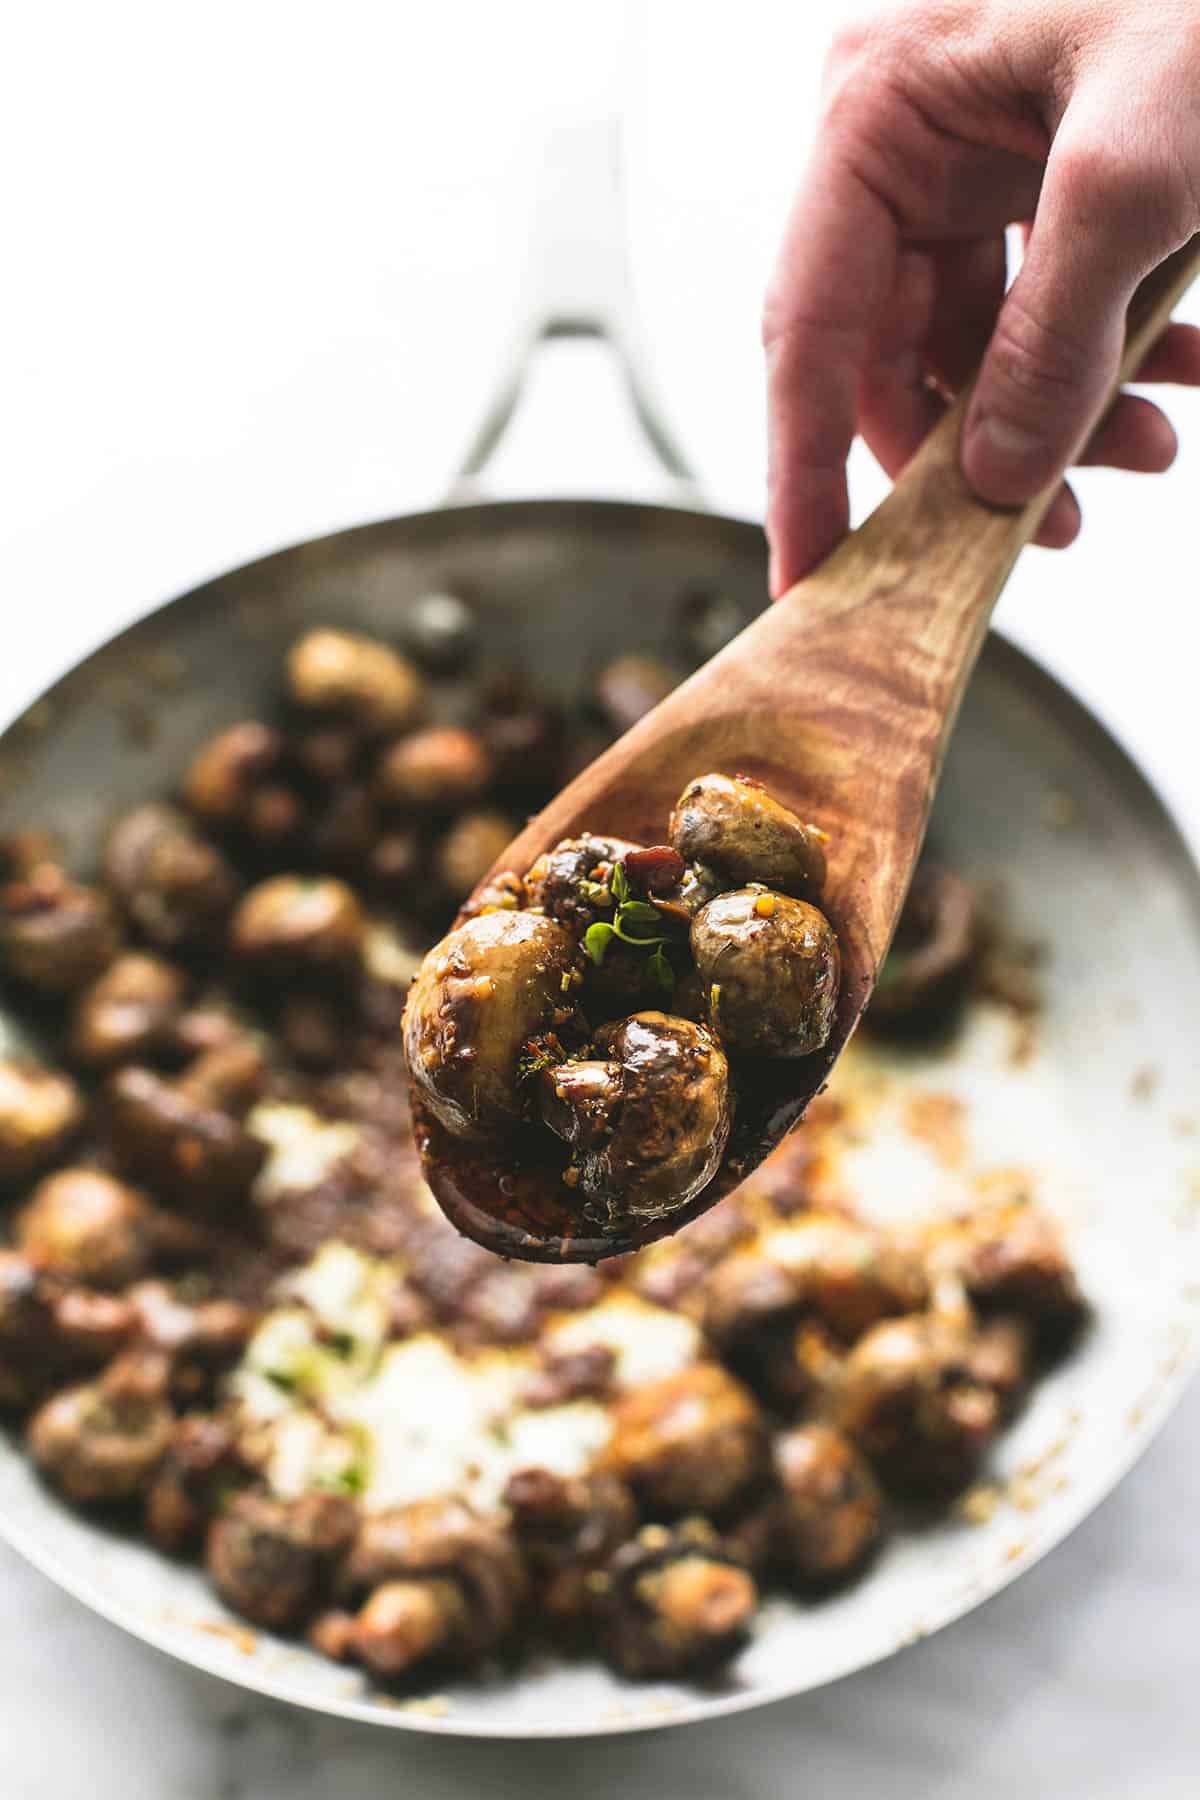 a hand holding a wooden serving spoon with garlic butter mushrooms on it above a skillet of more mushrooms.